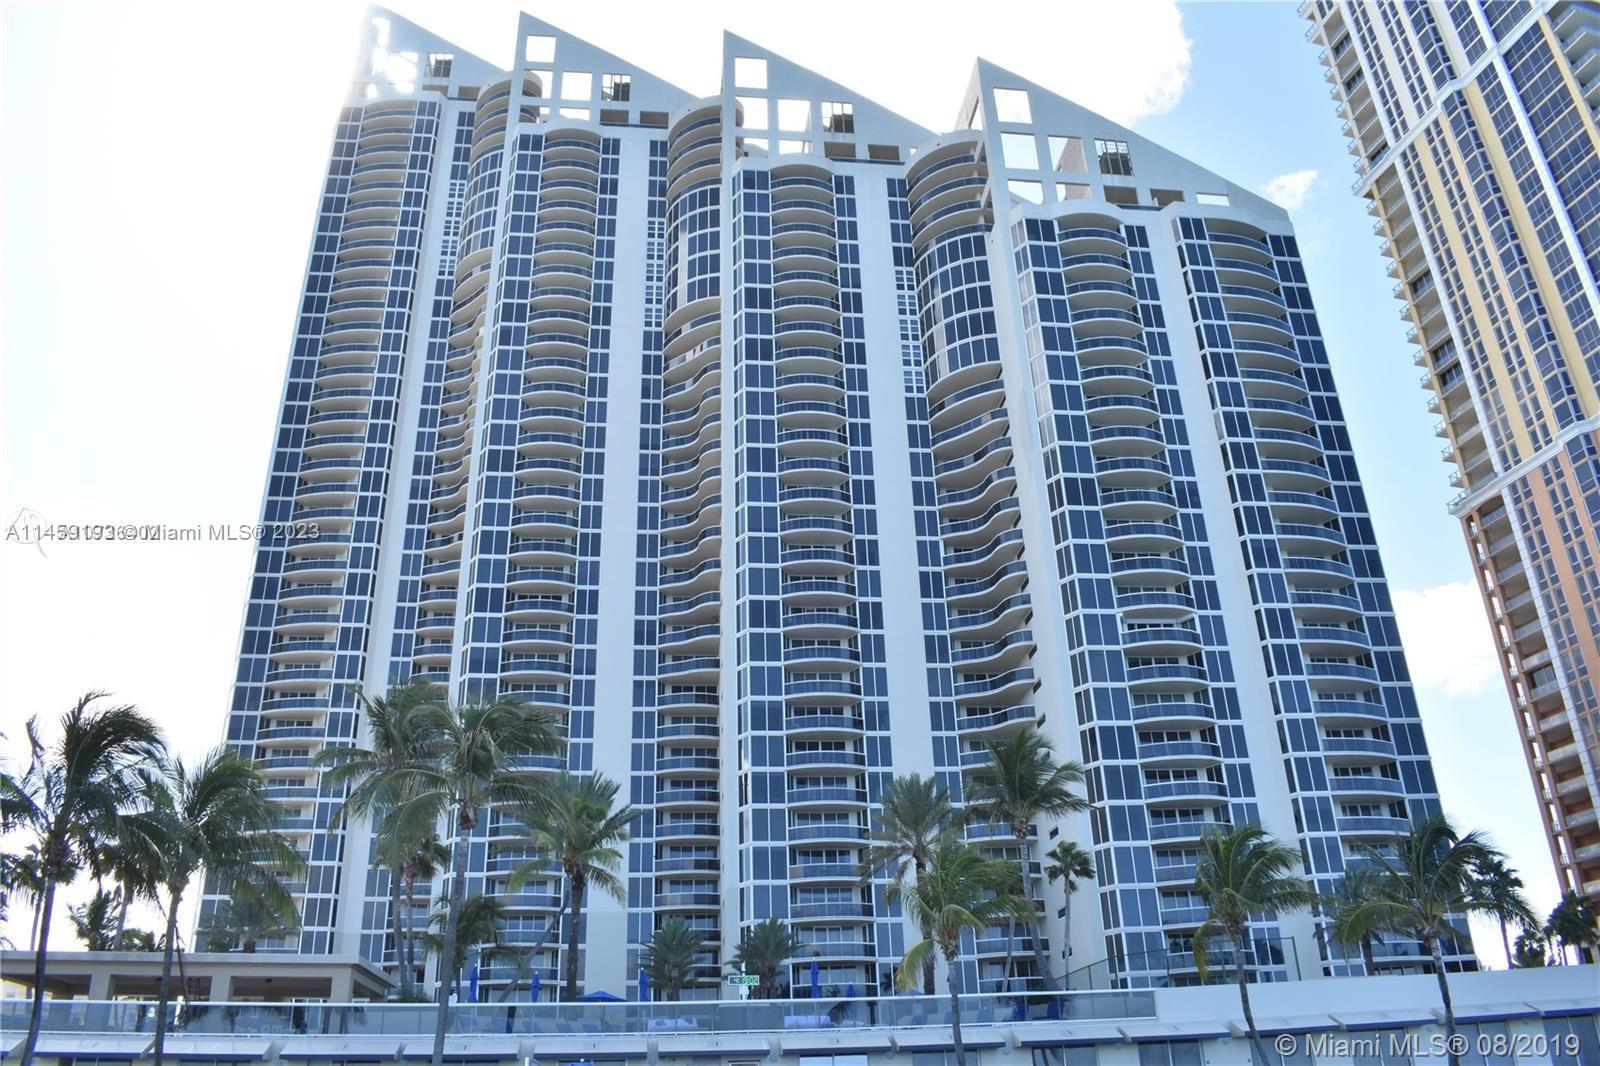 AMAZING 2/2/1 UNIT AT ONE OF THE MOST EXCLUSIVE BUILDINGS IN SUNNY ISLES BEACH. UNIT BEING SOLD FULL